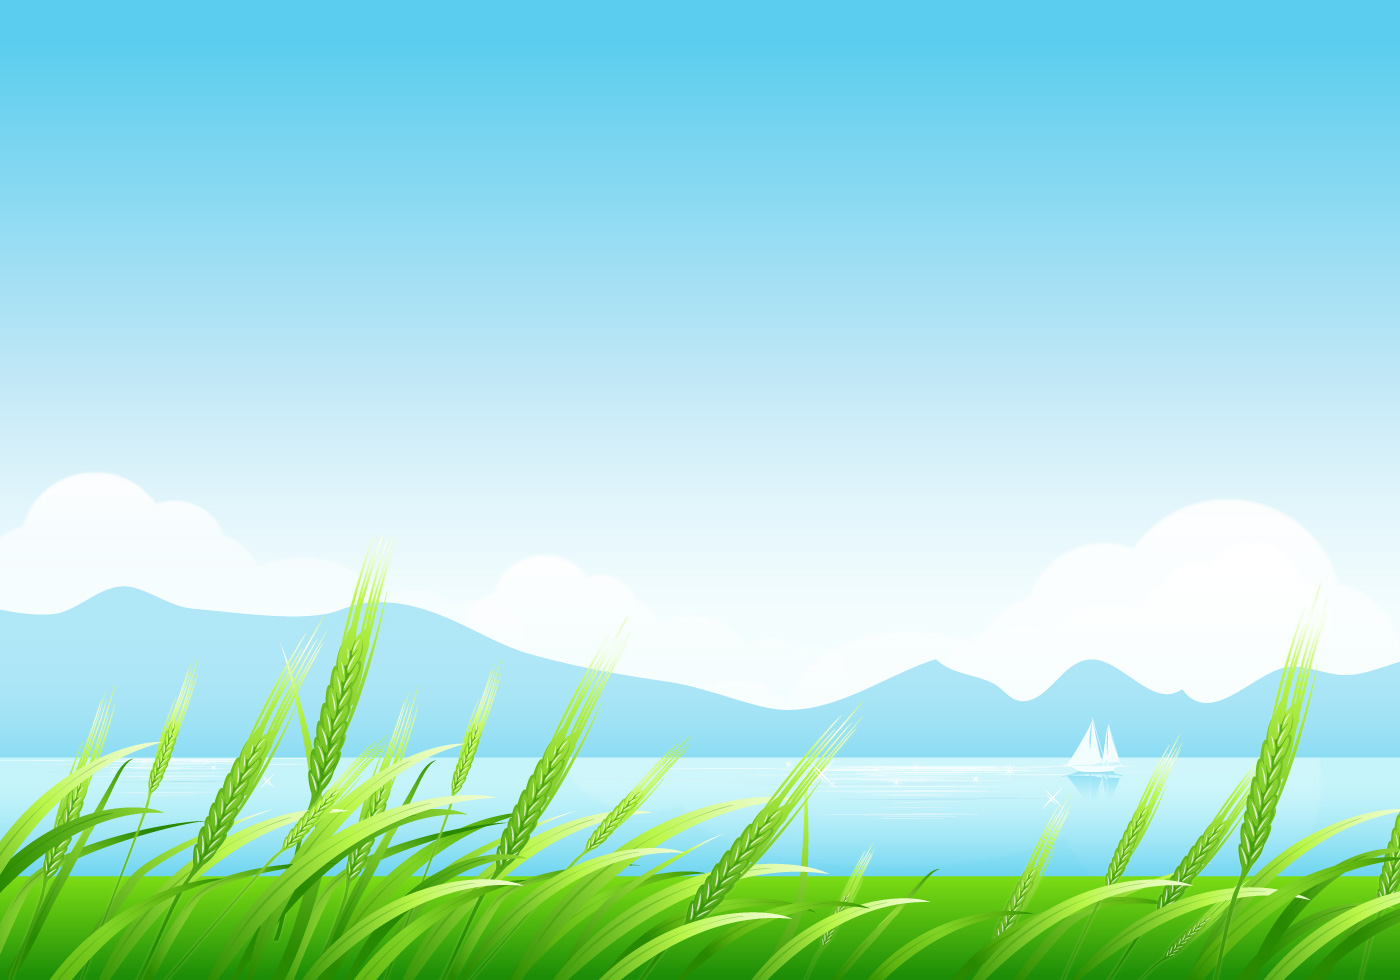 Spring Wheat And Mountains Landscape Wallpaper Vector - Photoshop Brush Tool Scenery - HD Wallpaper 